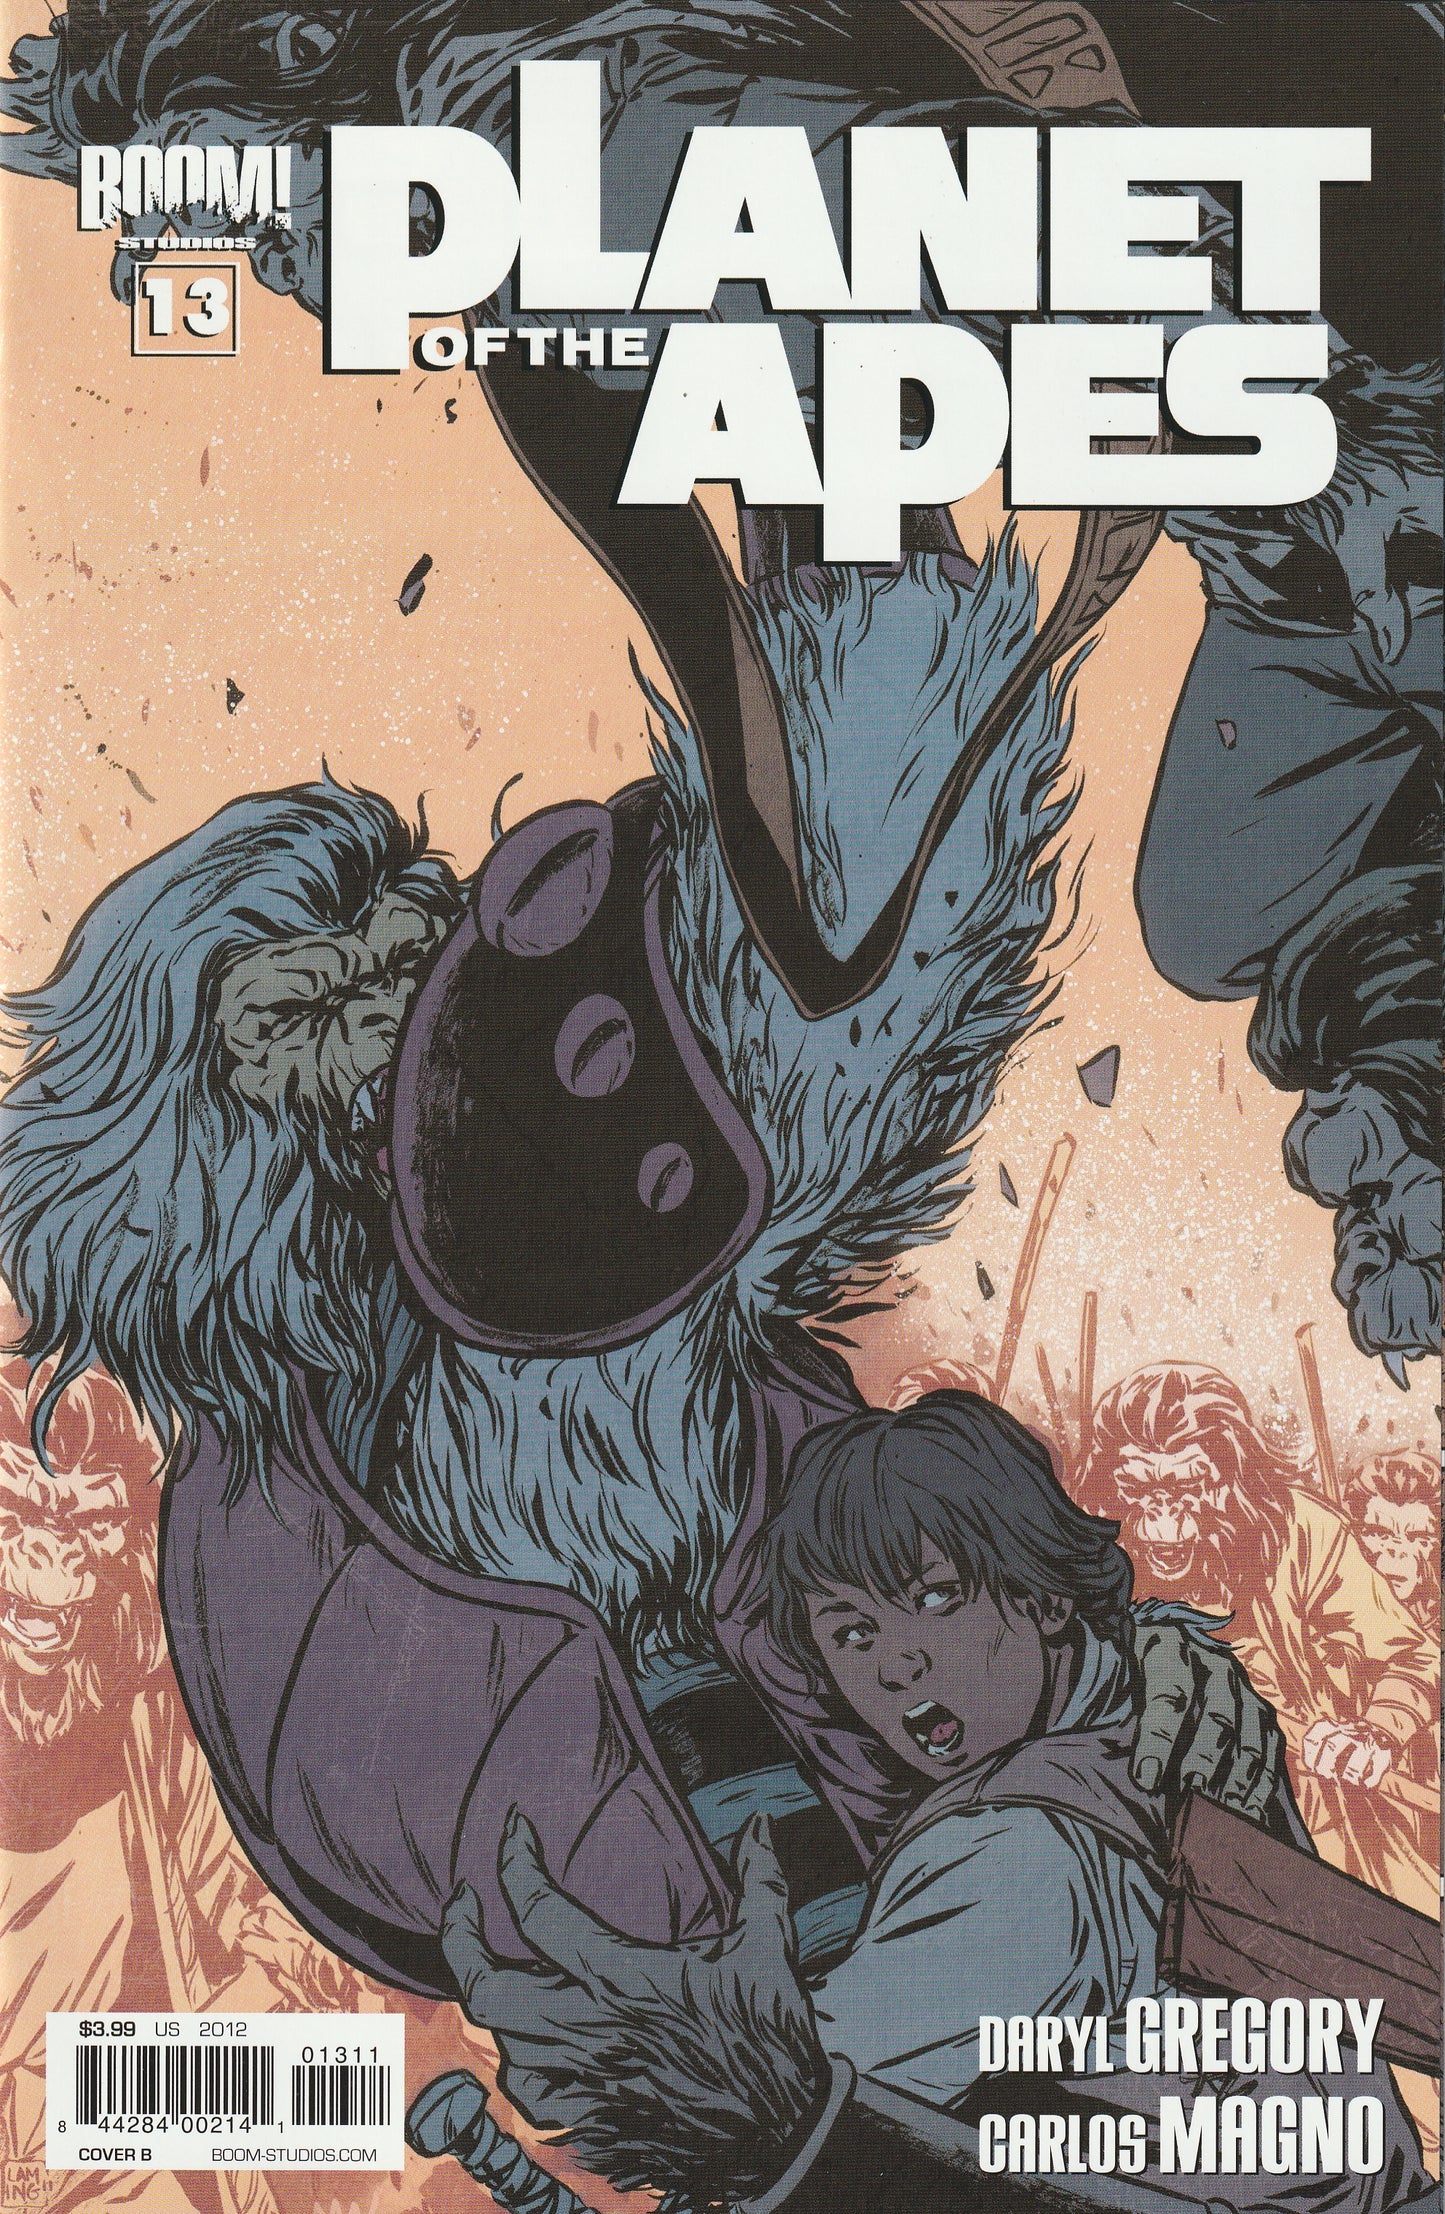 Planet of the Apes #13 (2012) - Cover B by Marc Laming